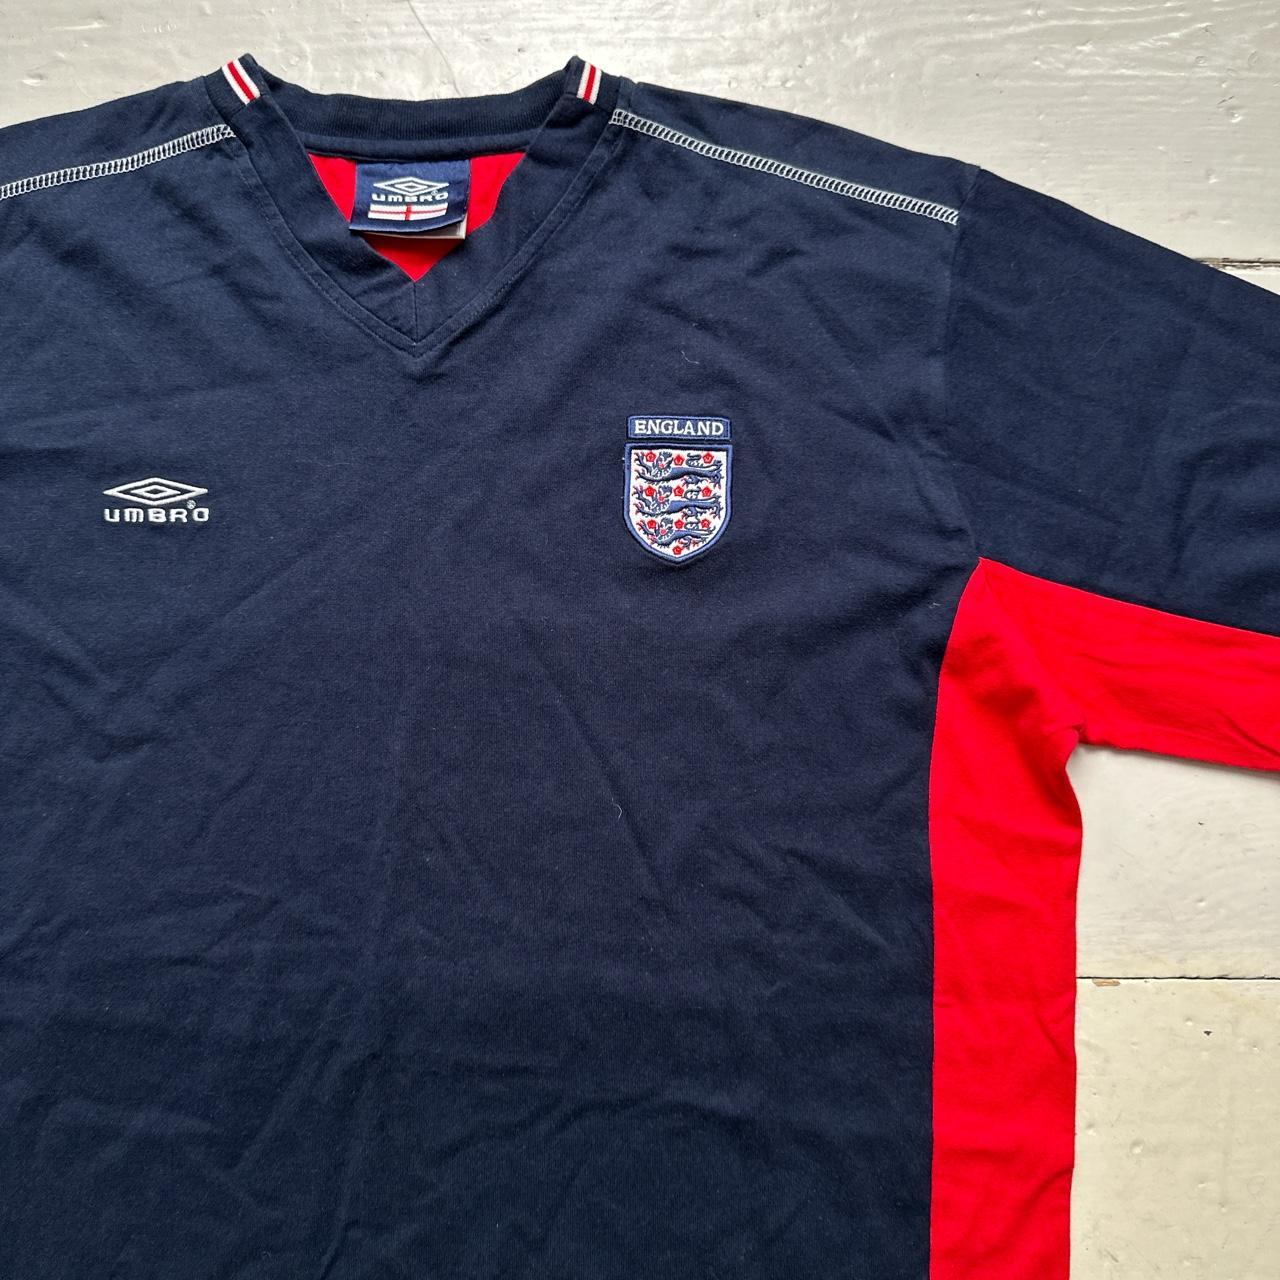 England Umbro Navy and Red Vintage Football T Shirt